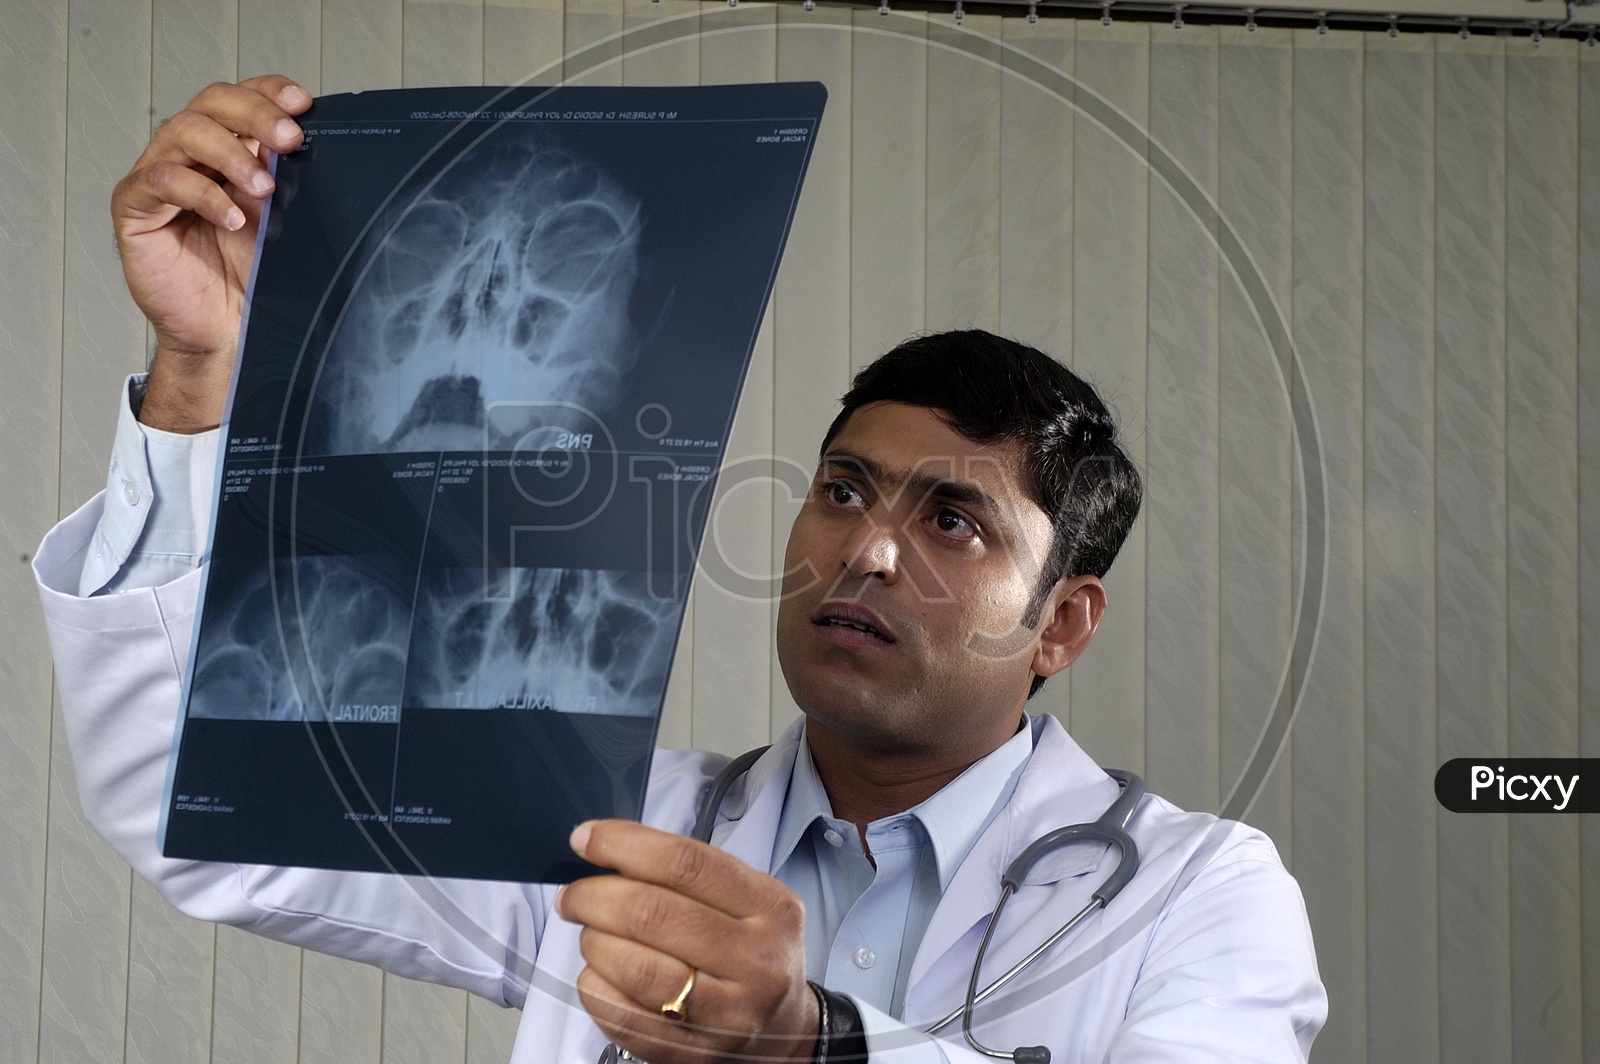 Doctor checking the x-ray